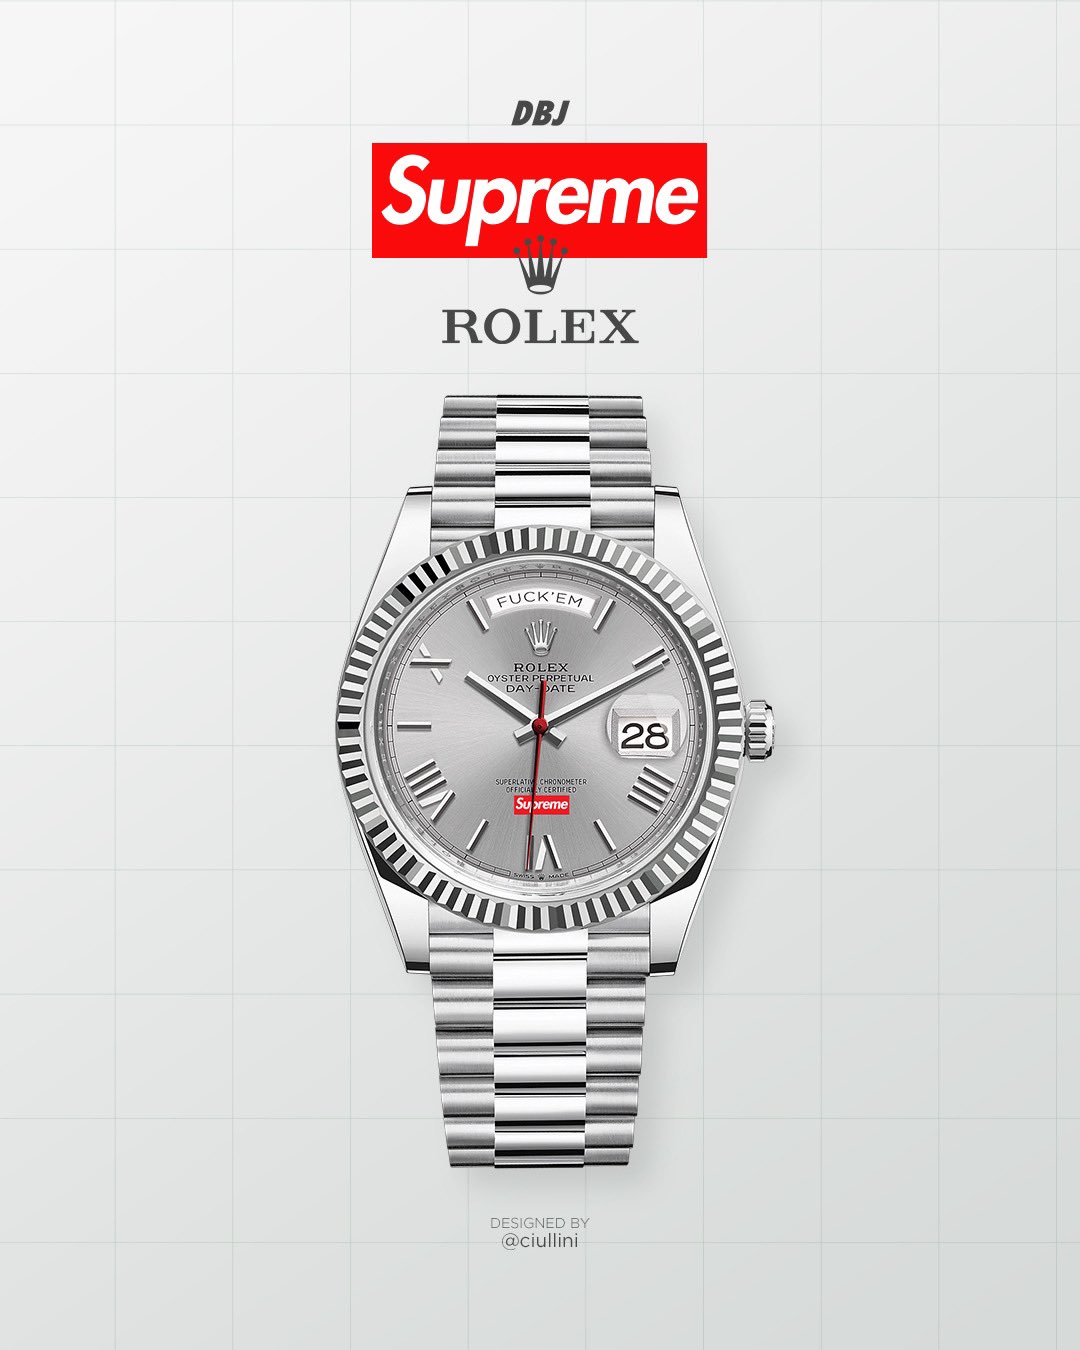 ros Forberedende navn skæg DropsByJay on Twitter: "Supreme/Rolex Expect an official collab from these  two this season, which is said to include a new designed watch along with  possibly more pieces. Stay tuned for more details